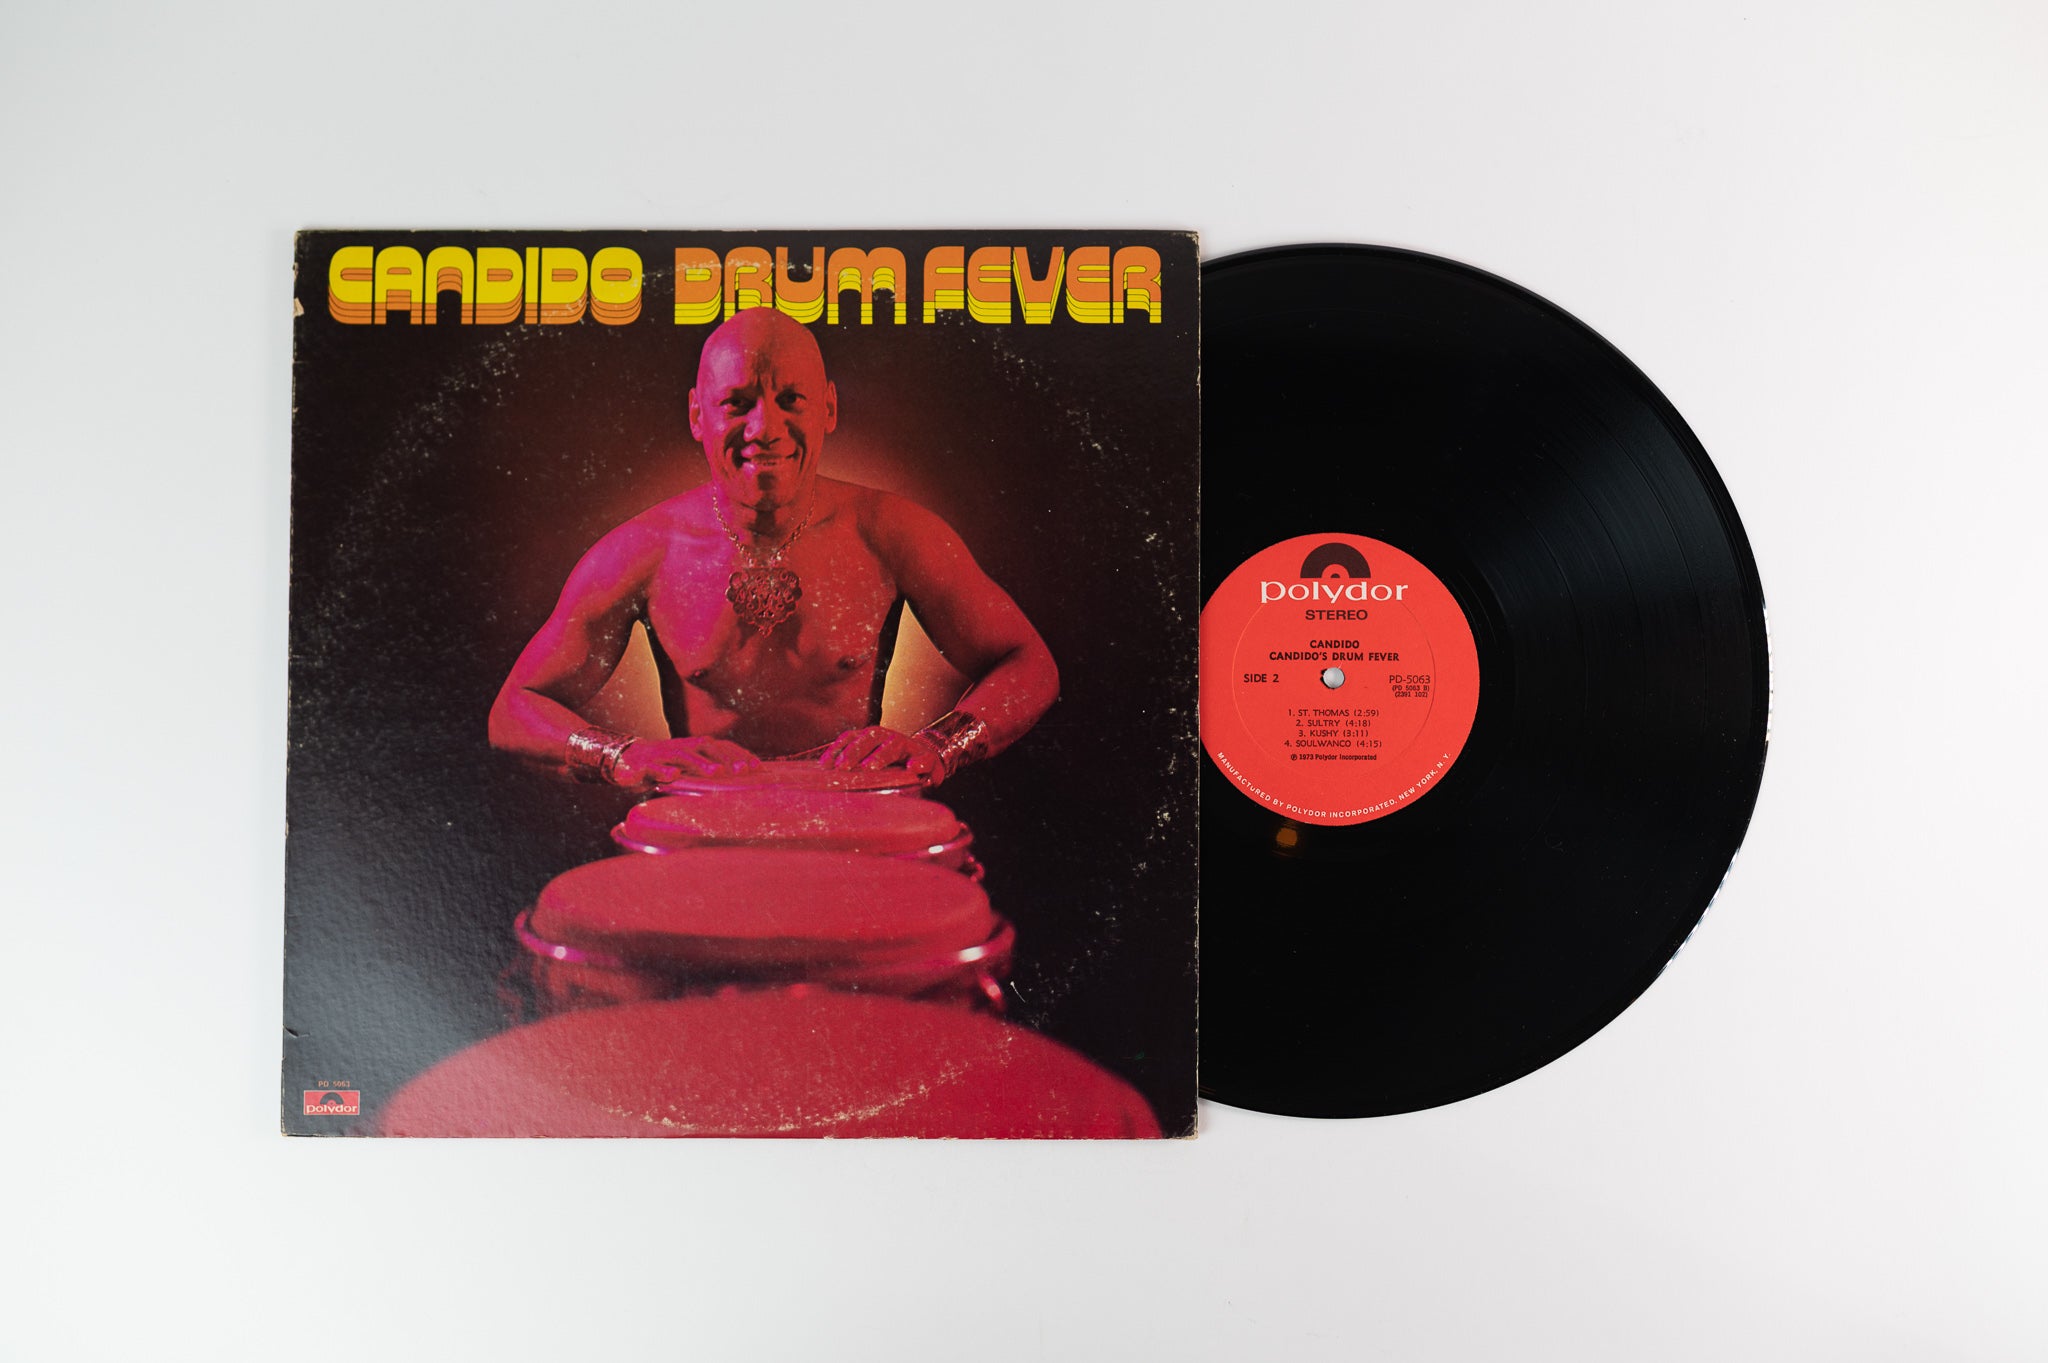 Candido - Drum Fever on Polydor